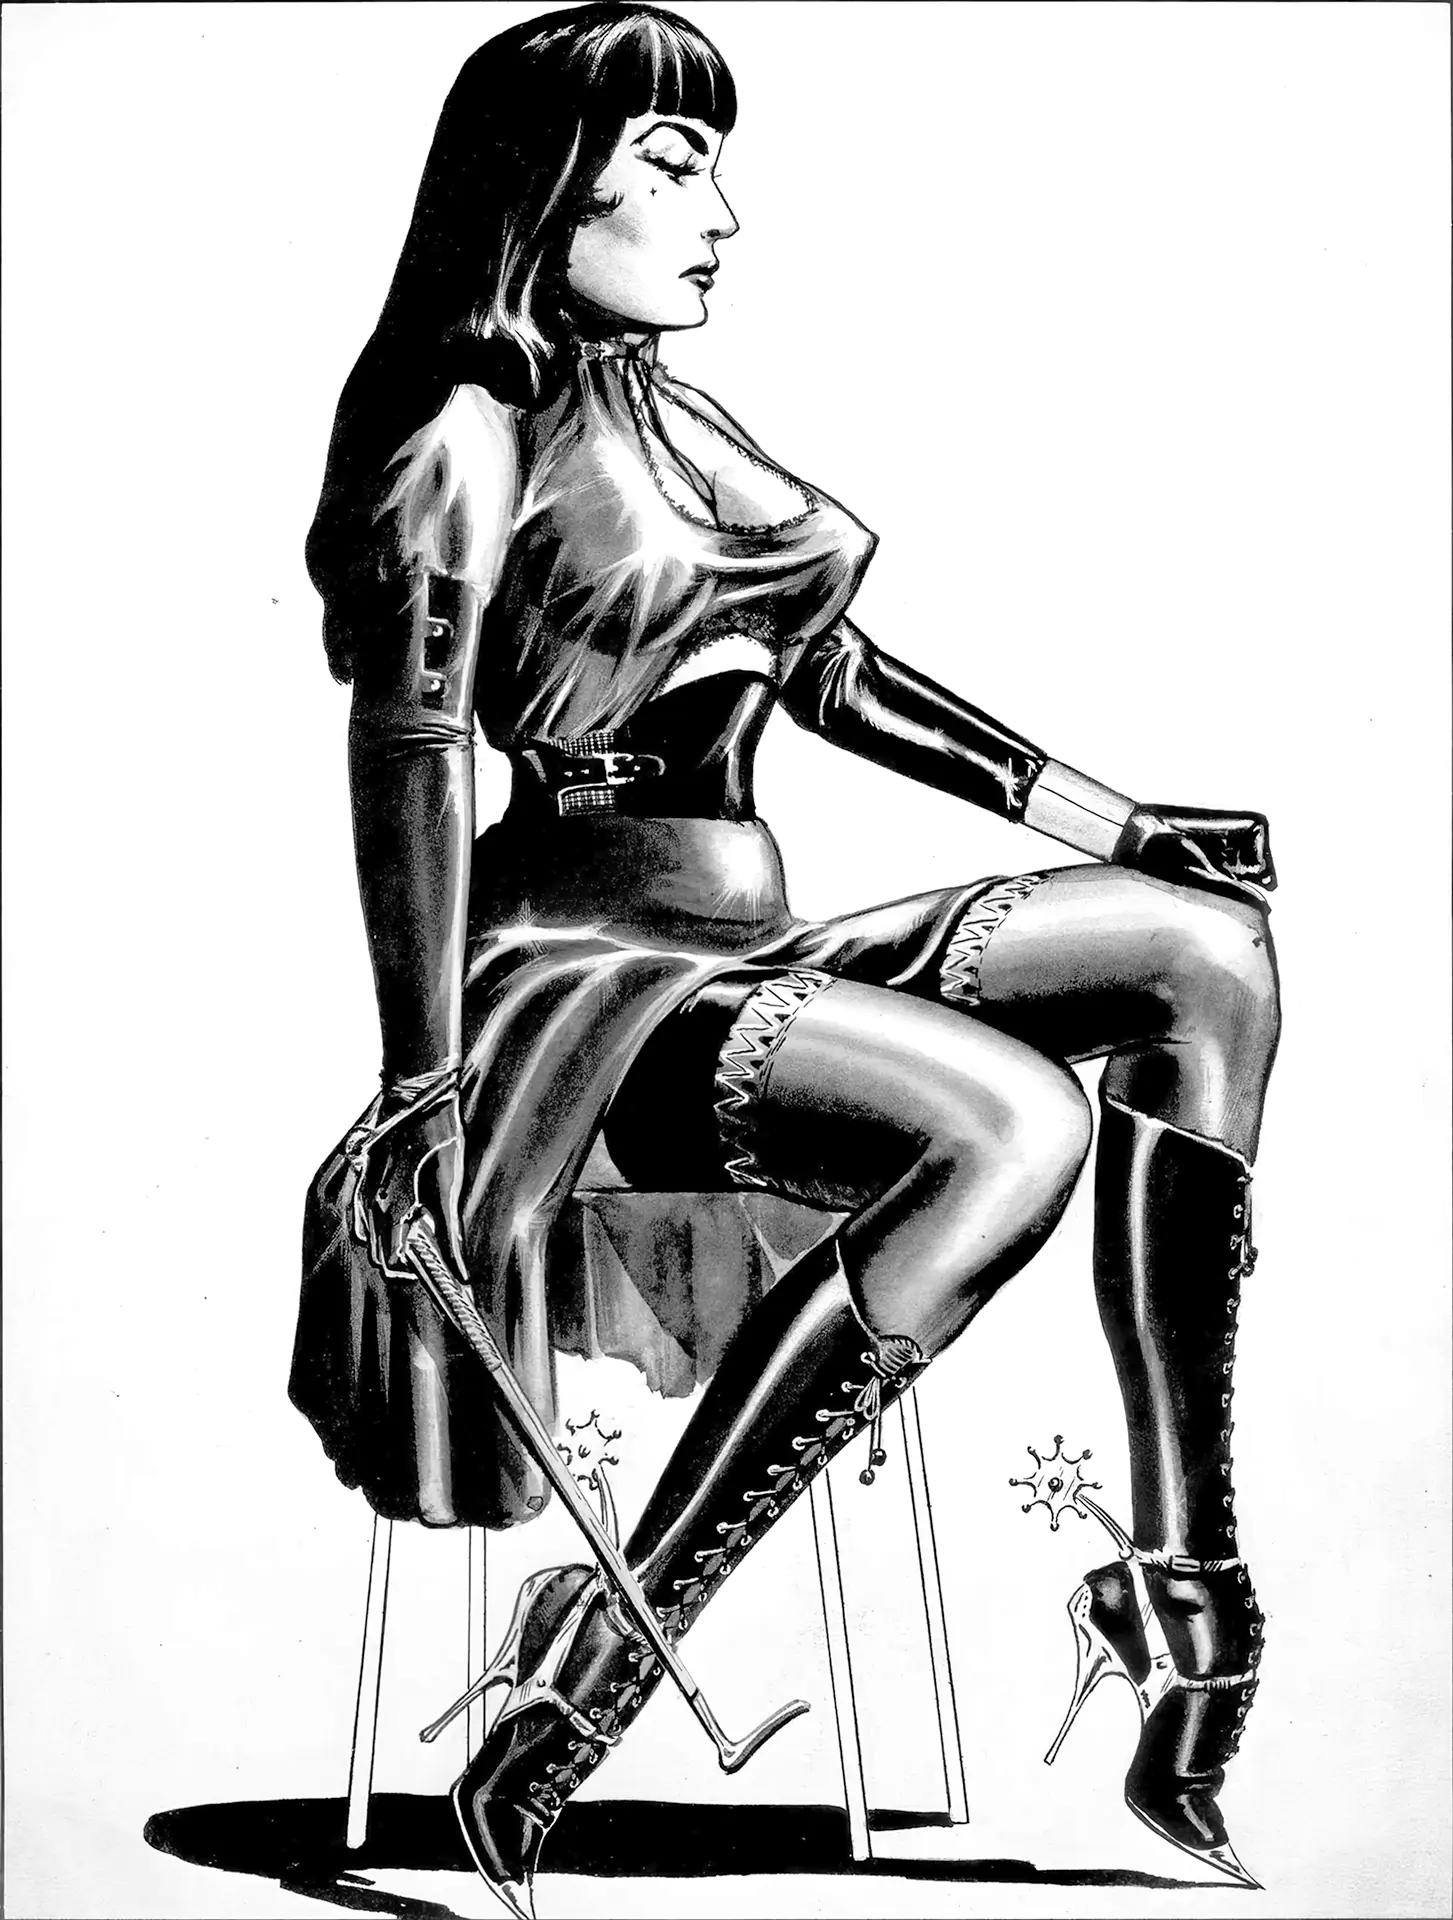 Cruel vintage dominatrix in a leather dress boots and gloves